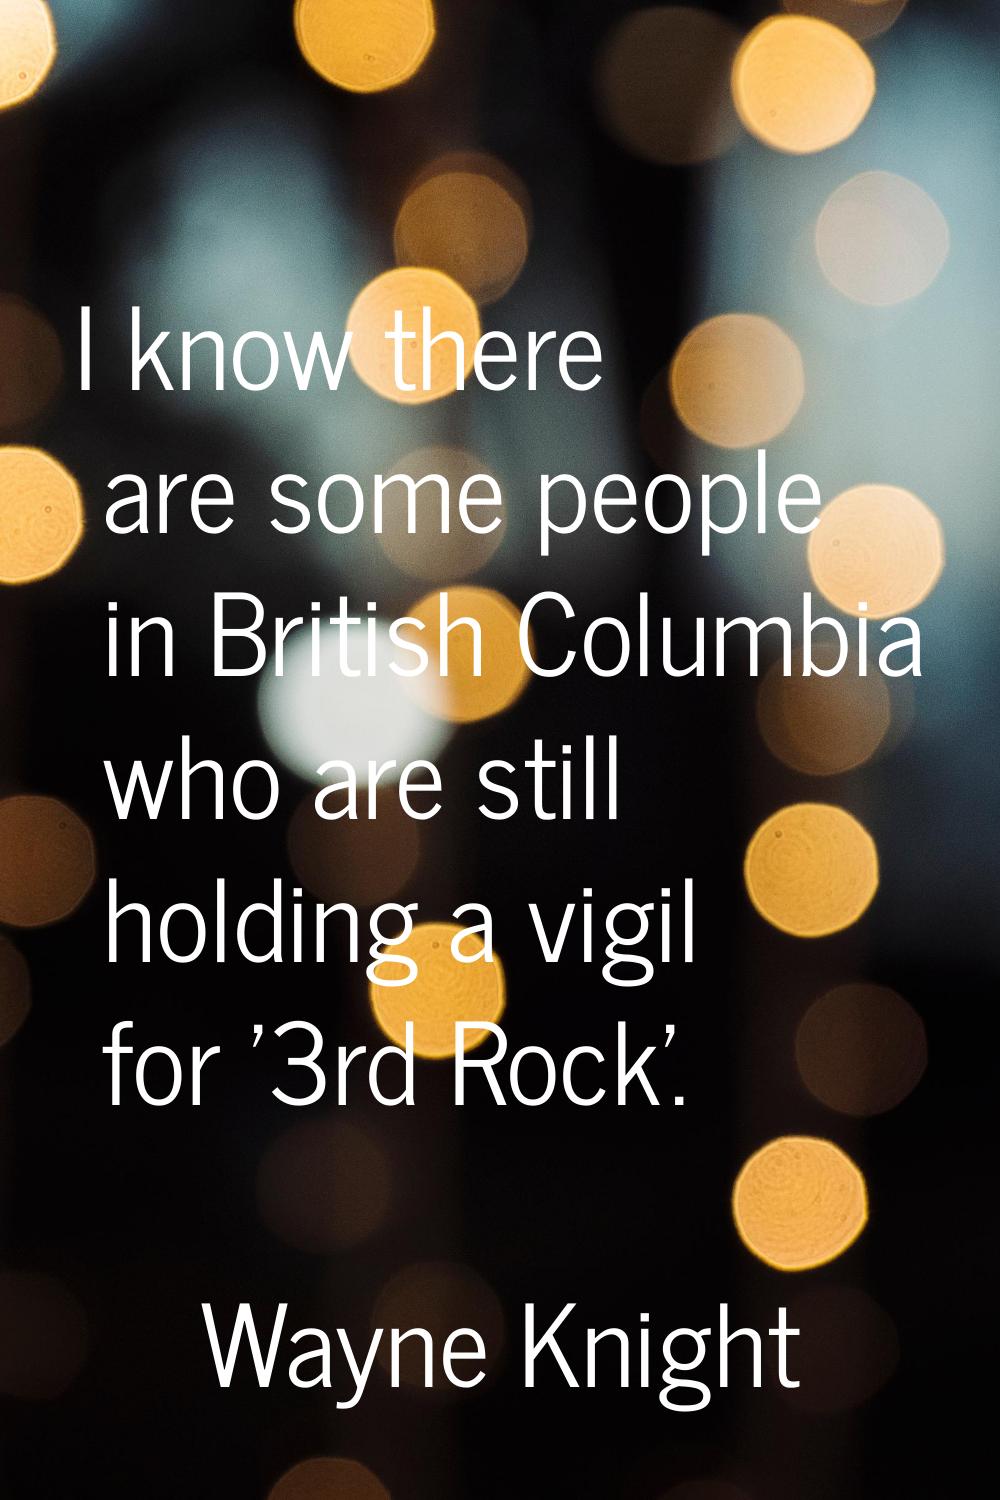 I know there are some people in British Columbia who are still holding a vigil for '3rd Rock'.